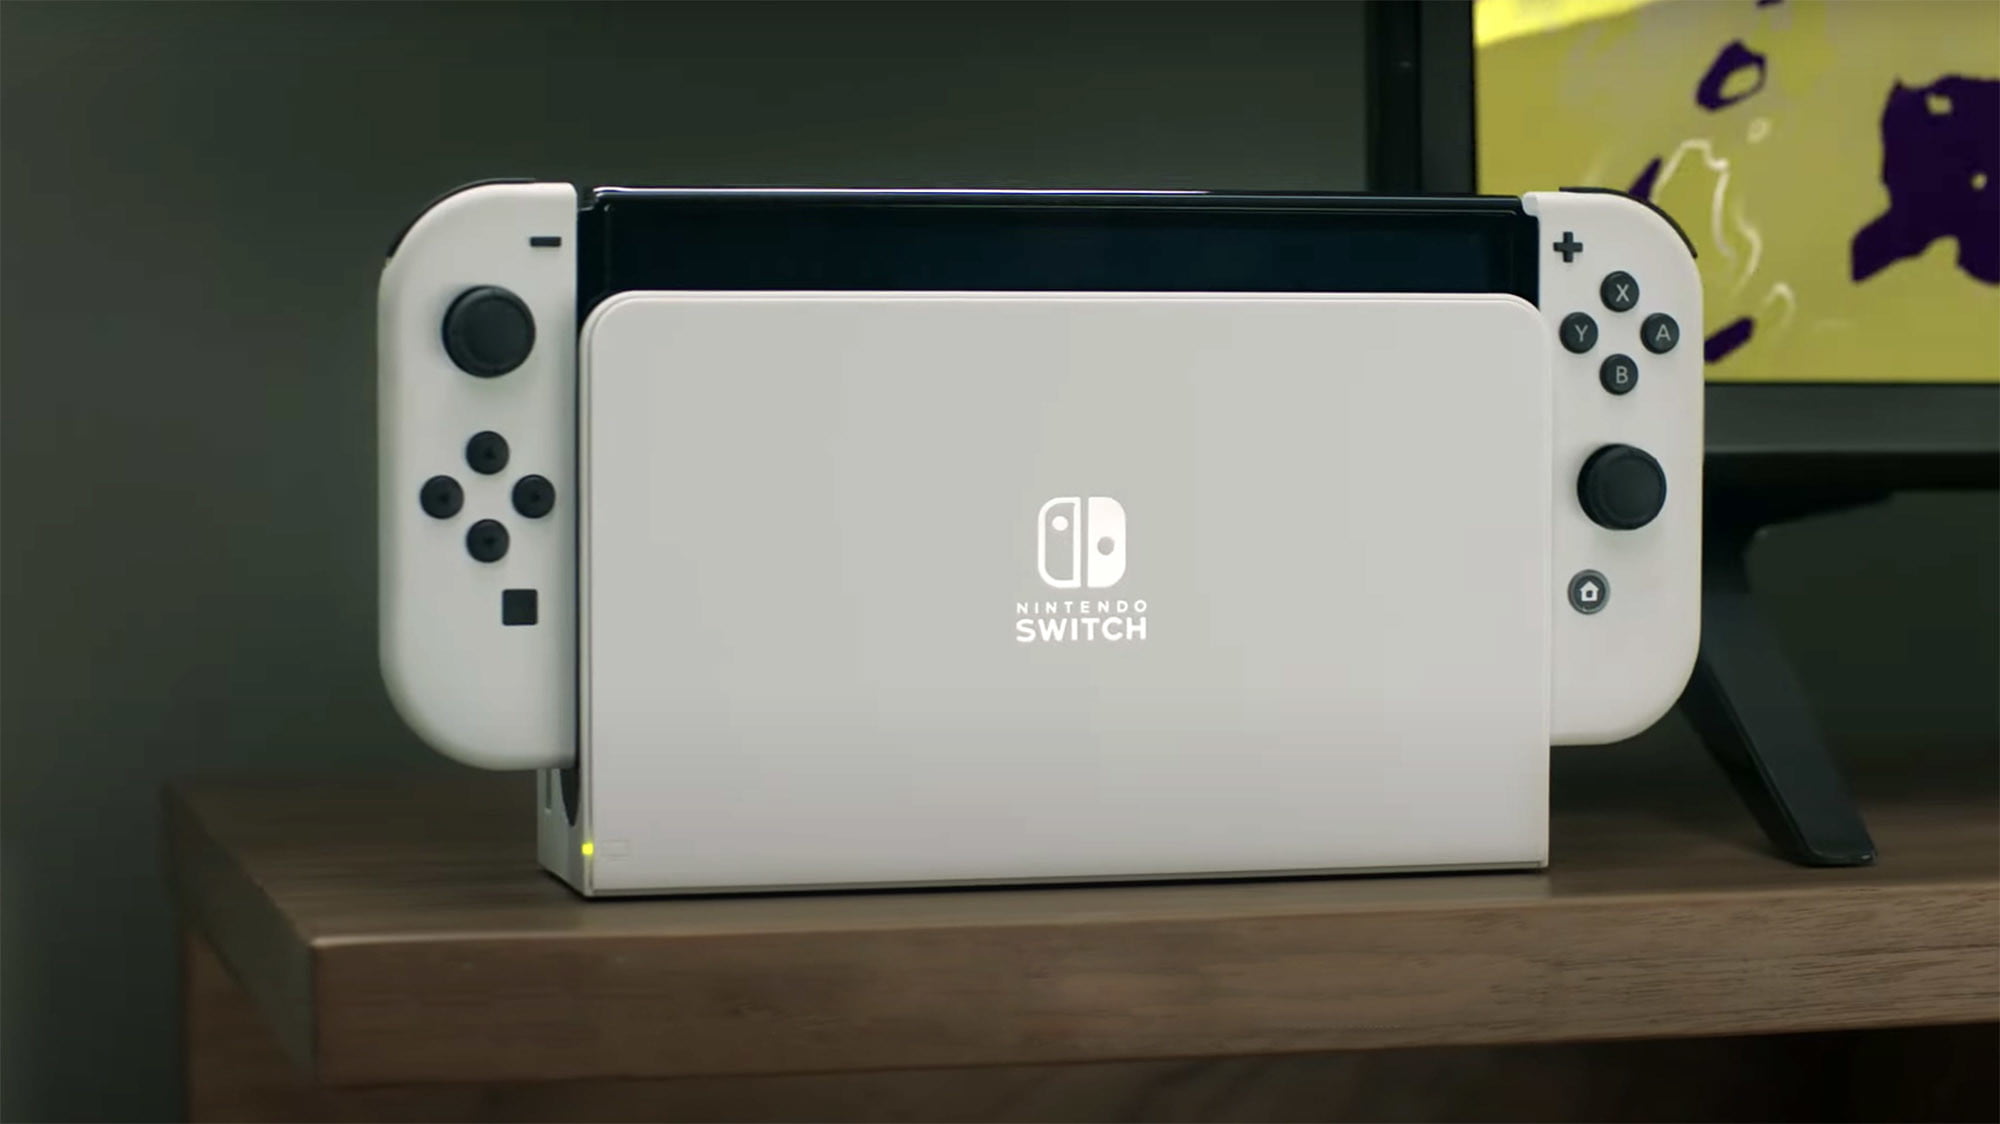 Now You Can Buy Just The OLED Switch Dock, If You Want